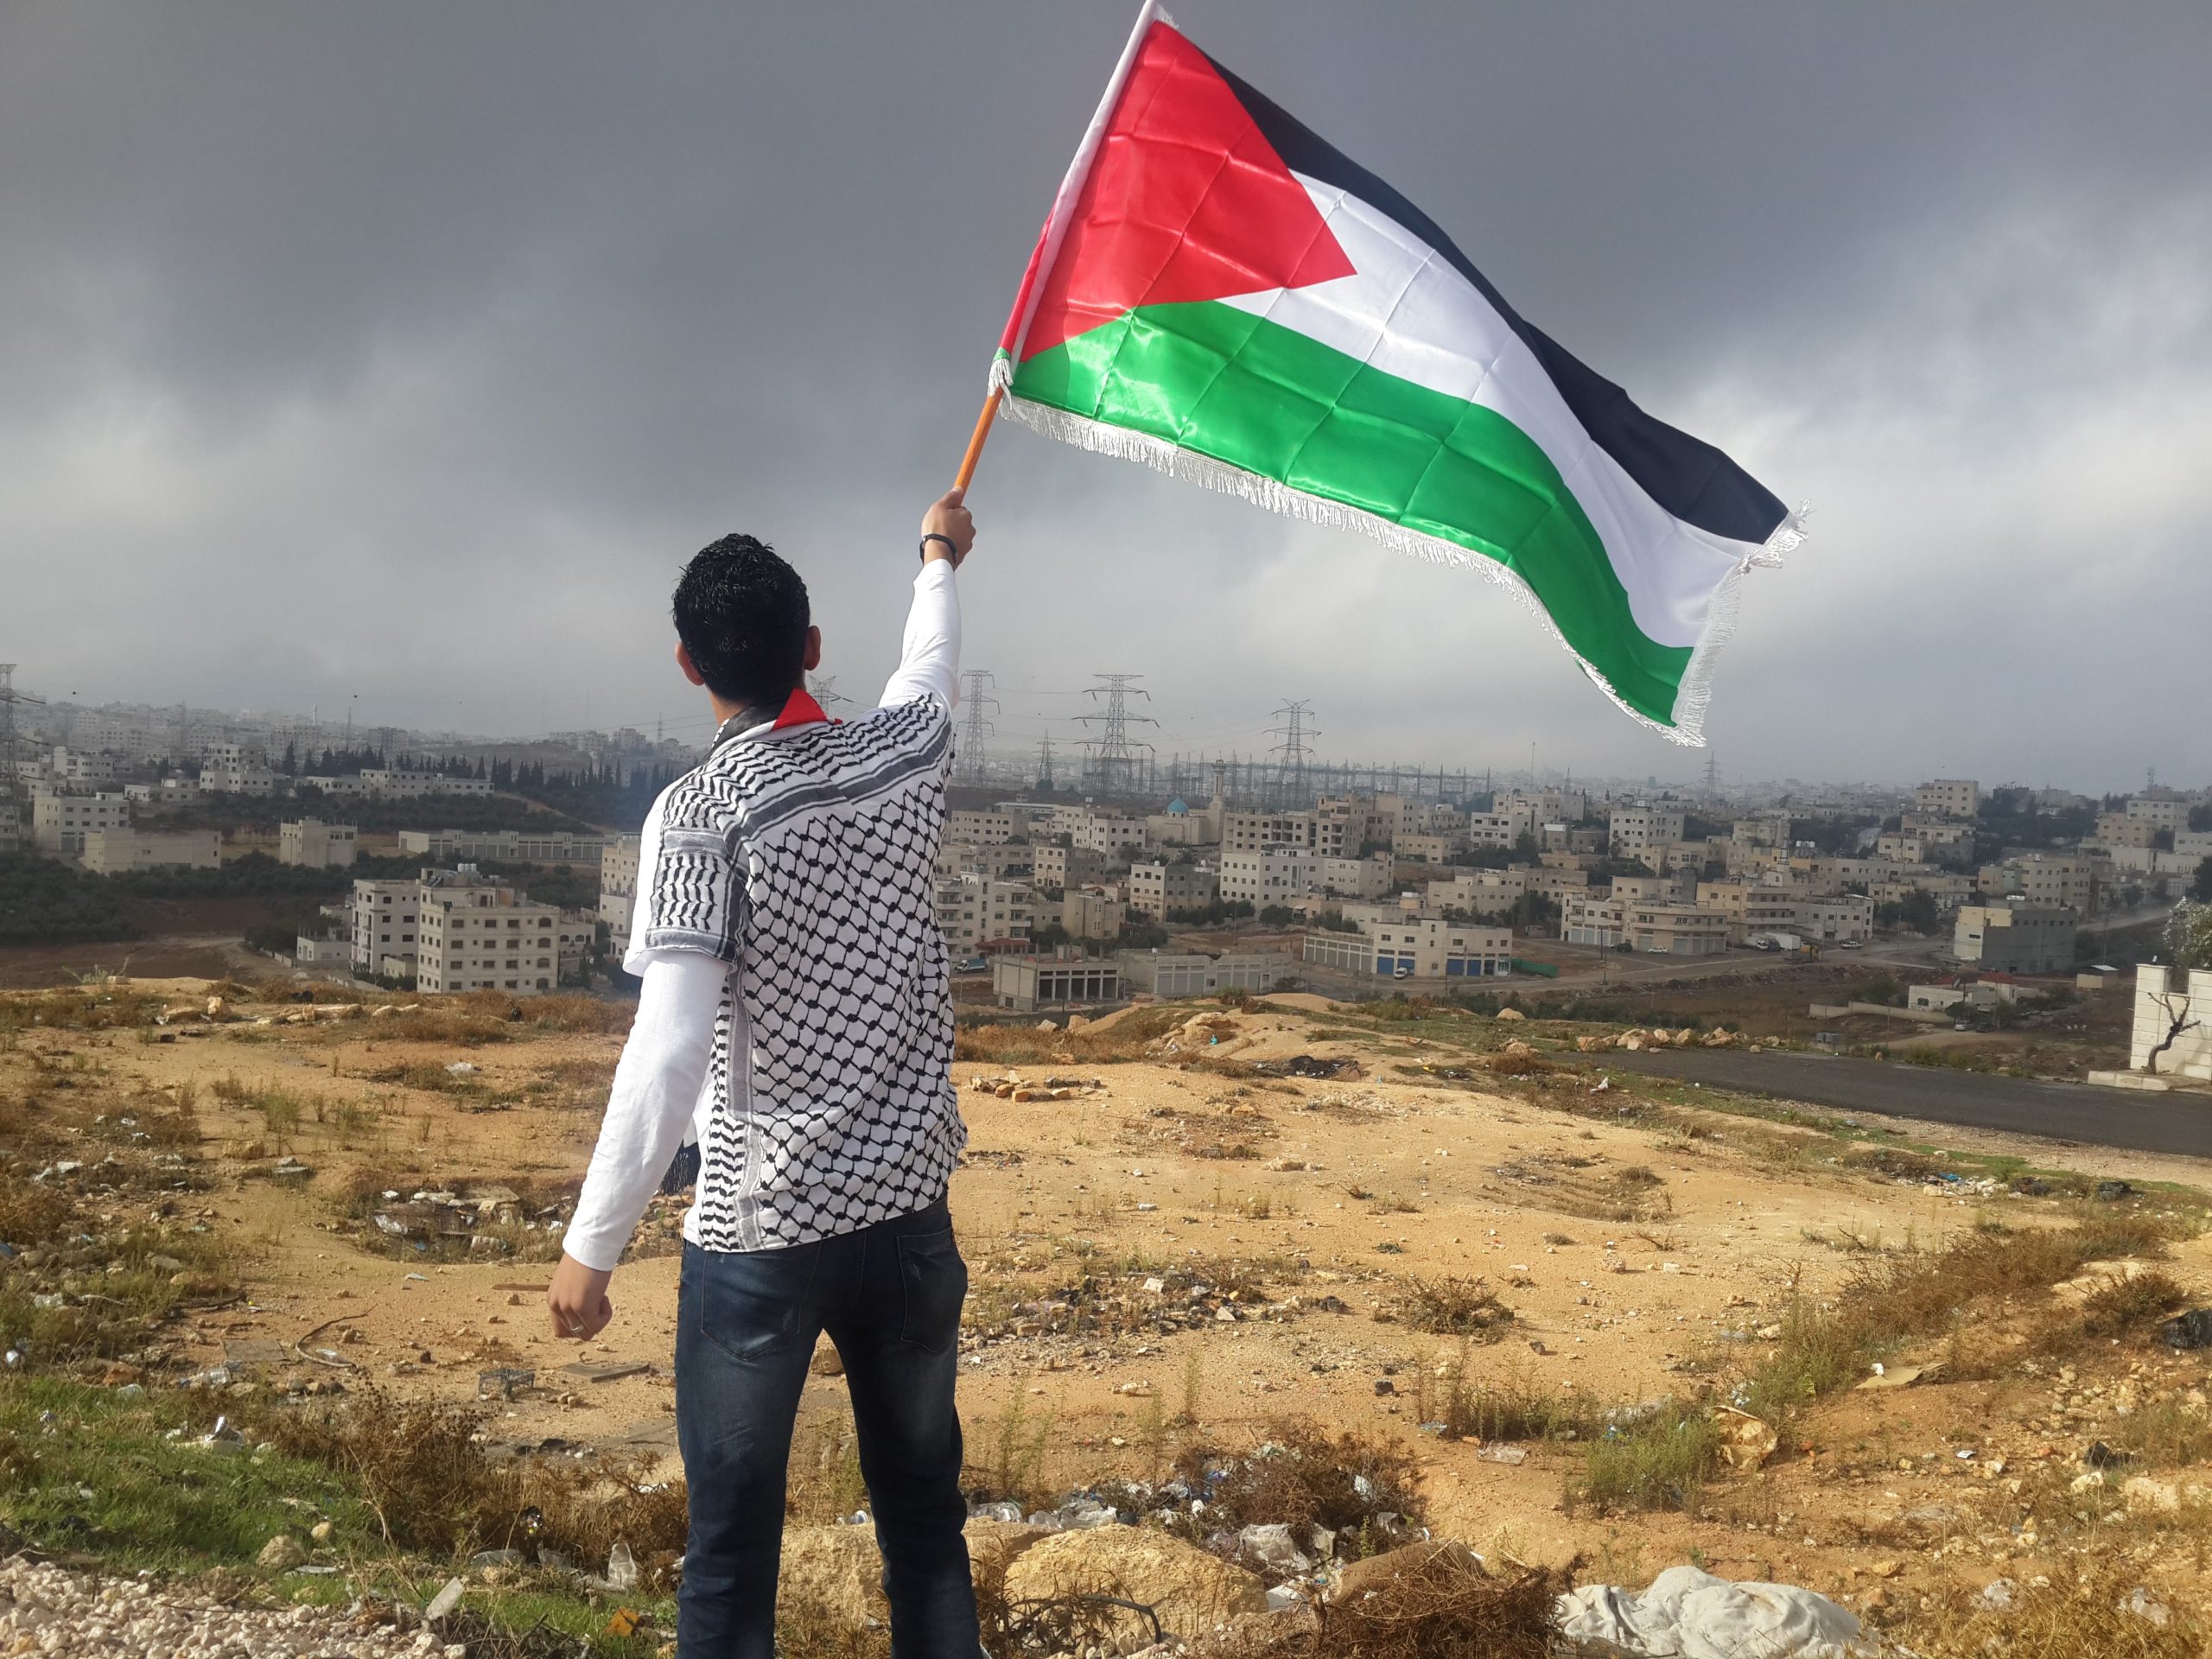 Friends in Palestine, Has the Future Arrived?